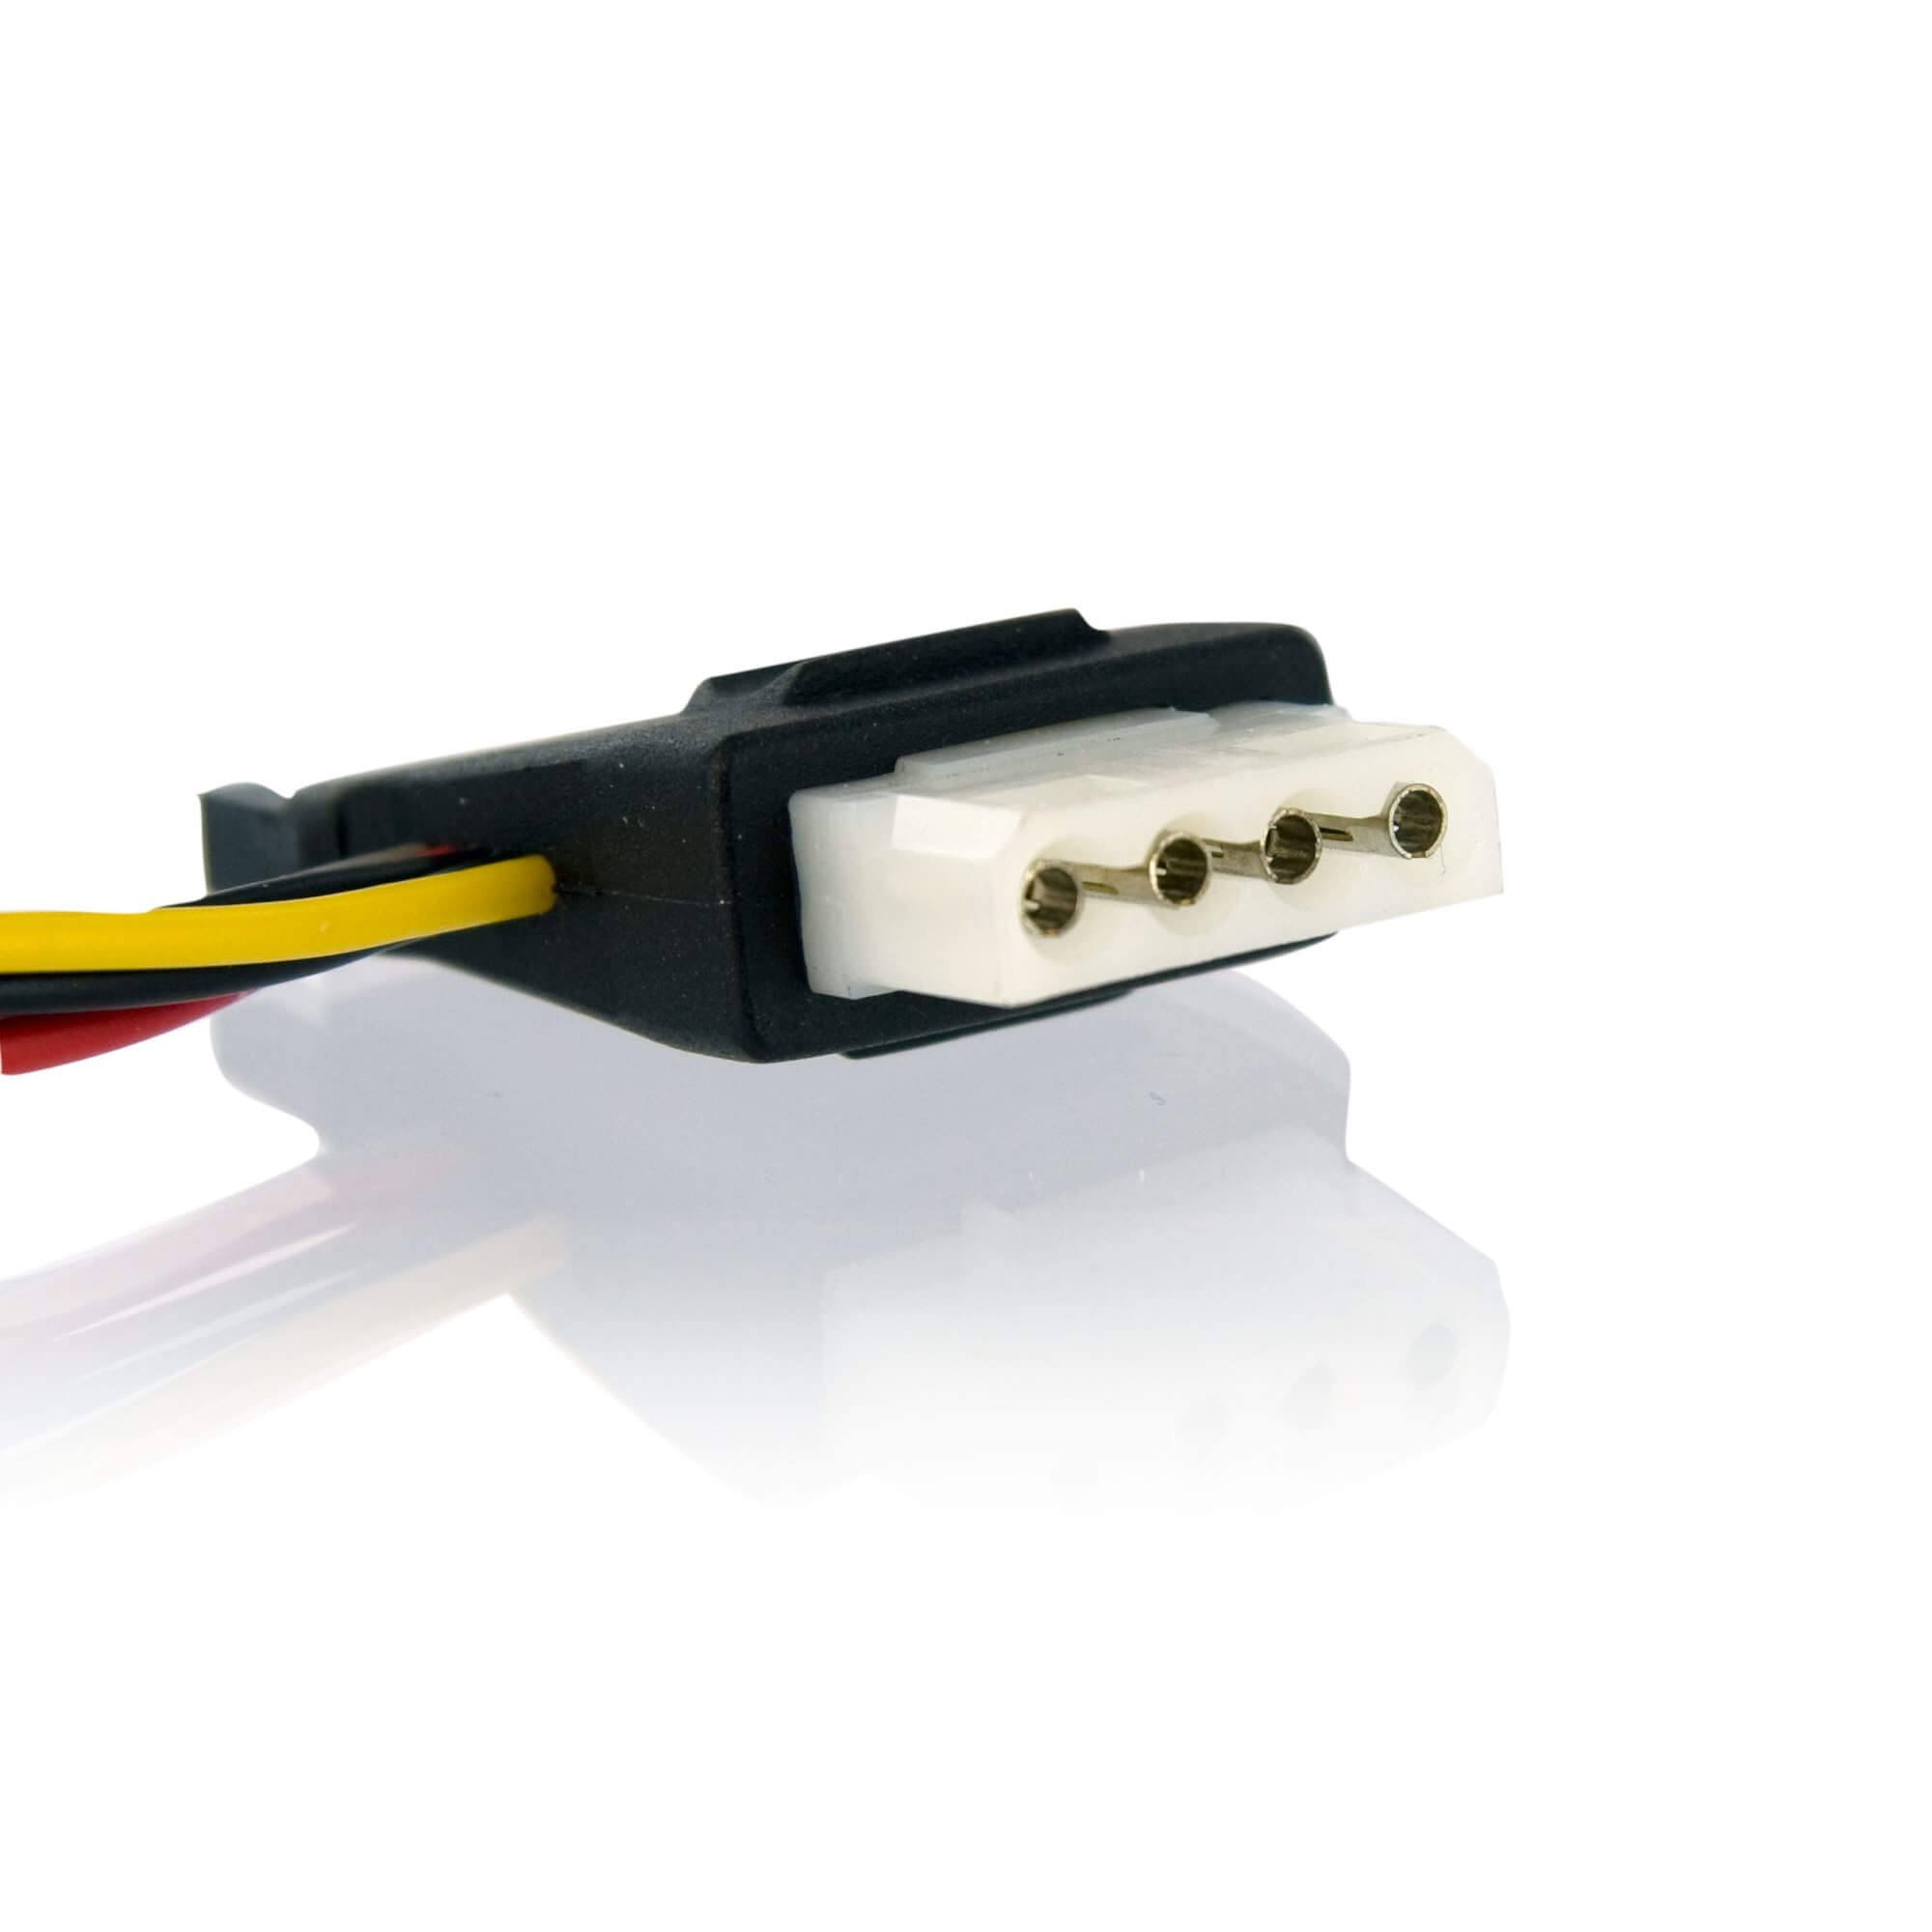 Cable splitter SATA to LP4 with 2x SATA Power Splitter Cable -2